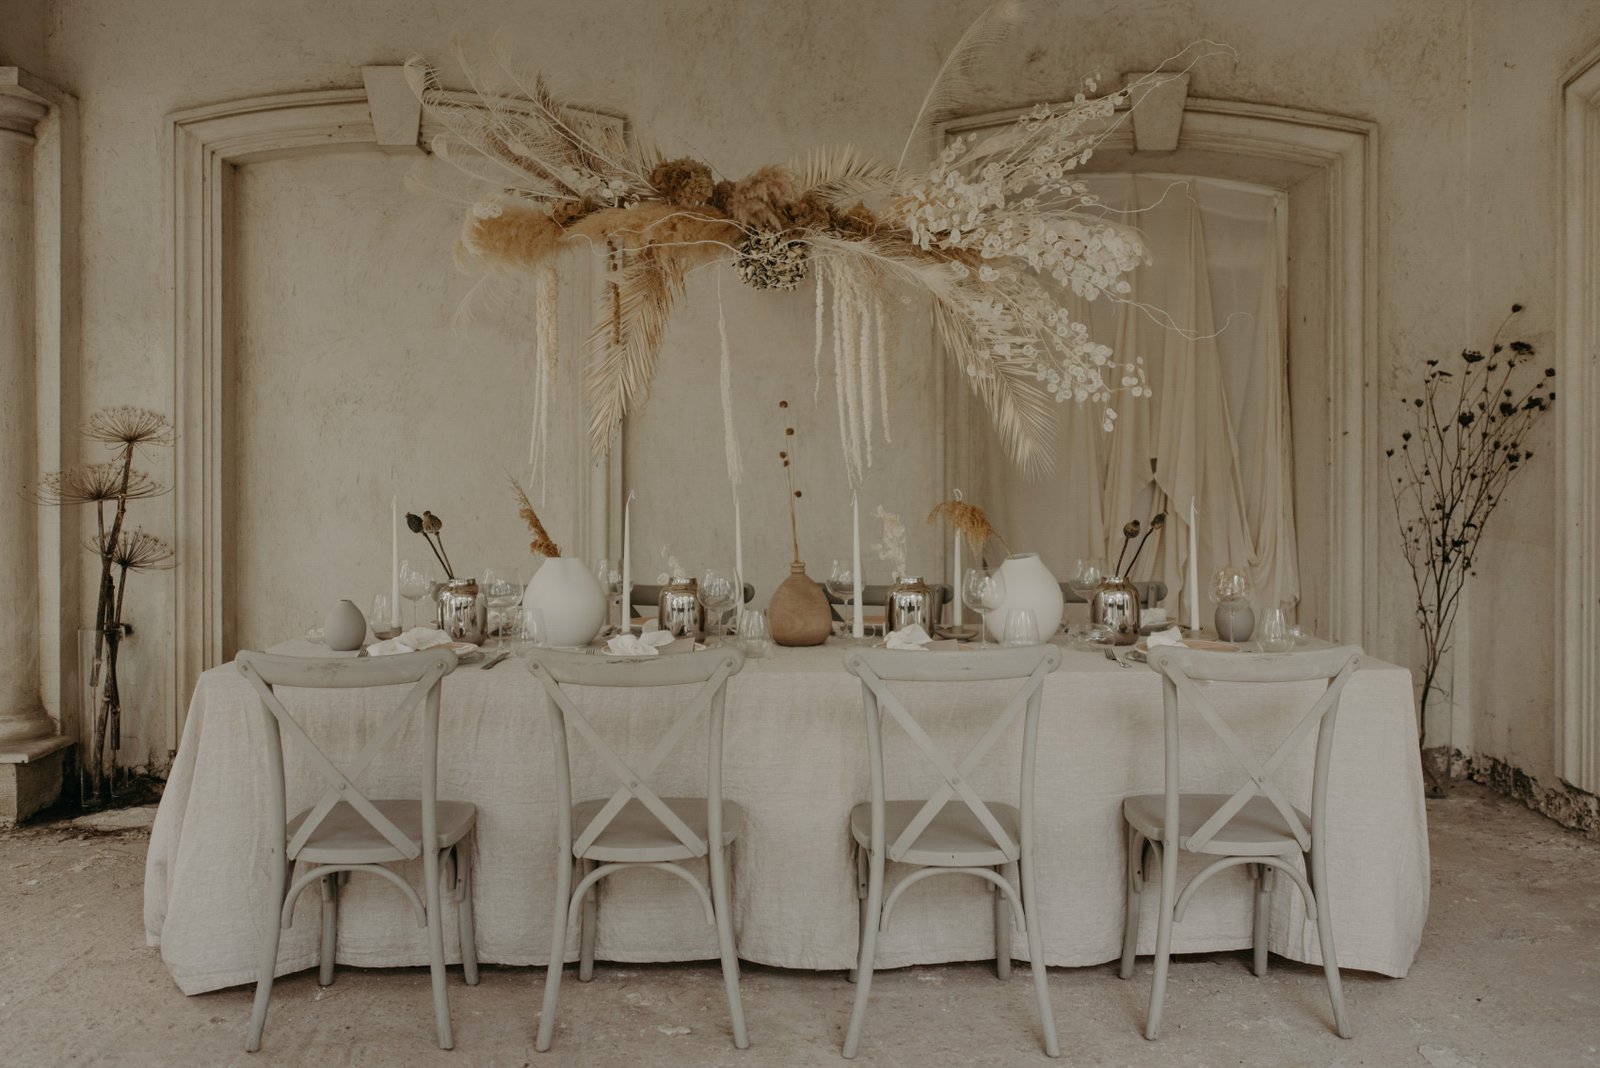 Two Brides Ethereal Wedding Inspiration Table